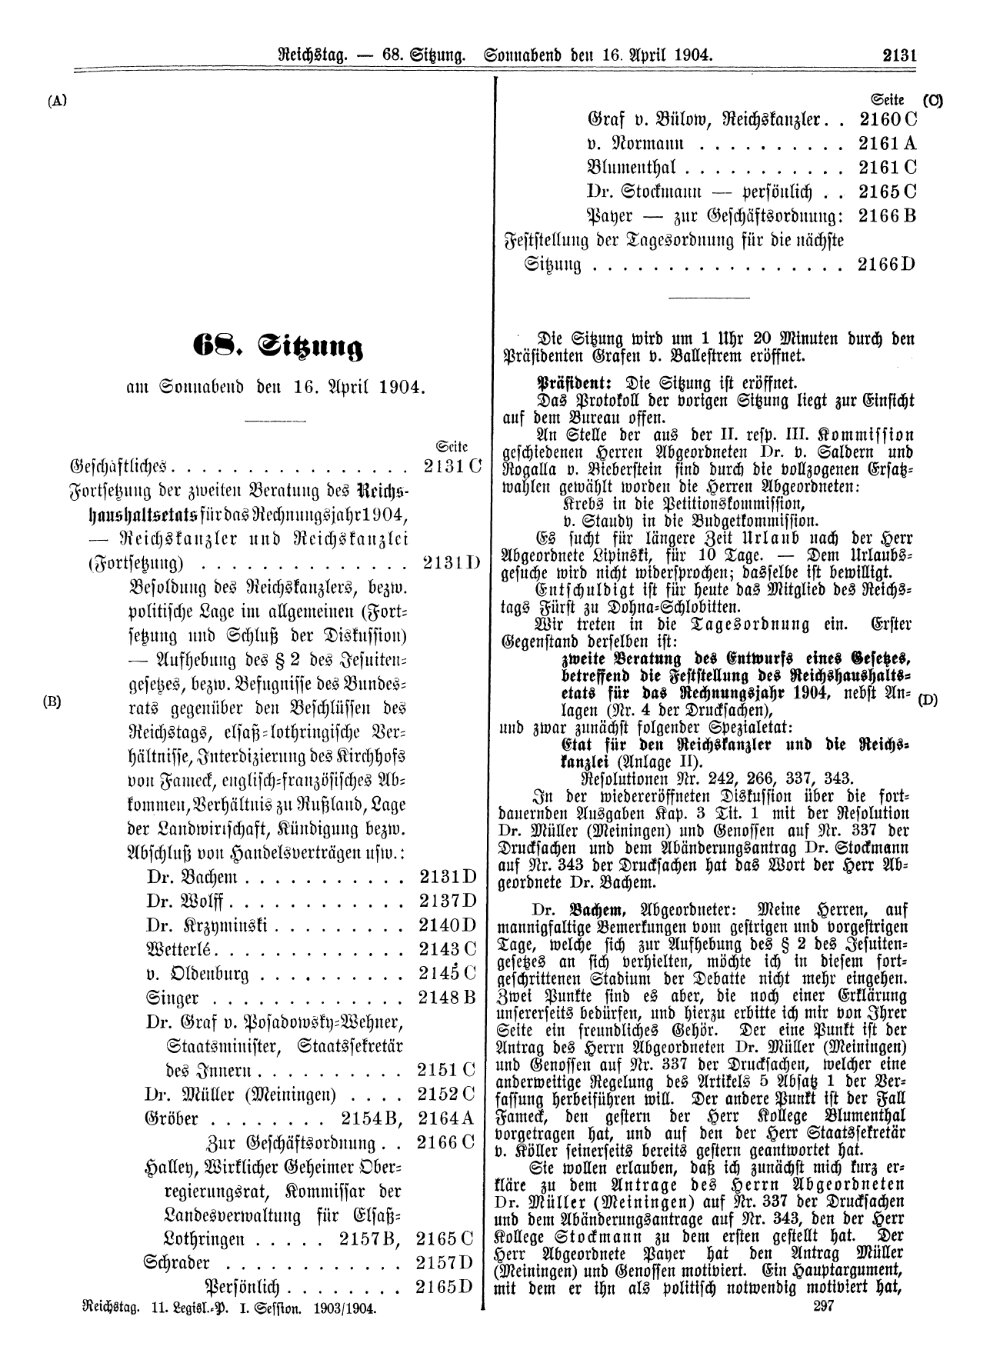 Scan of page 2131